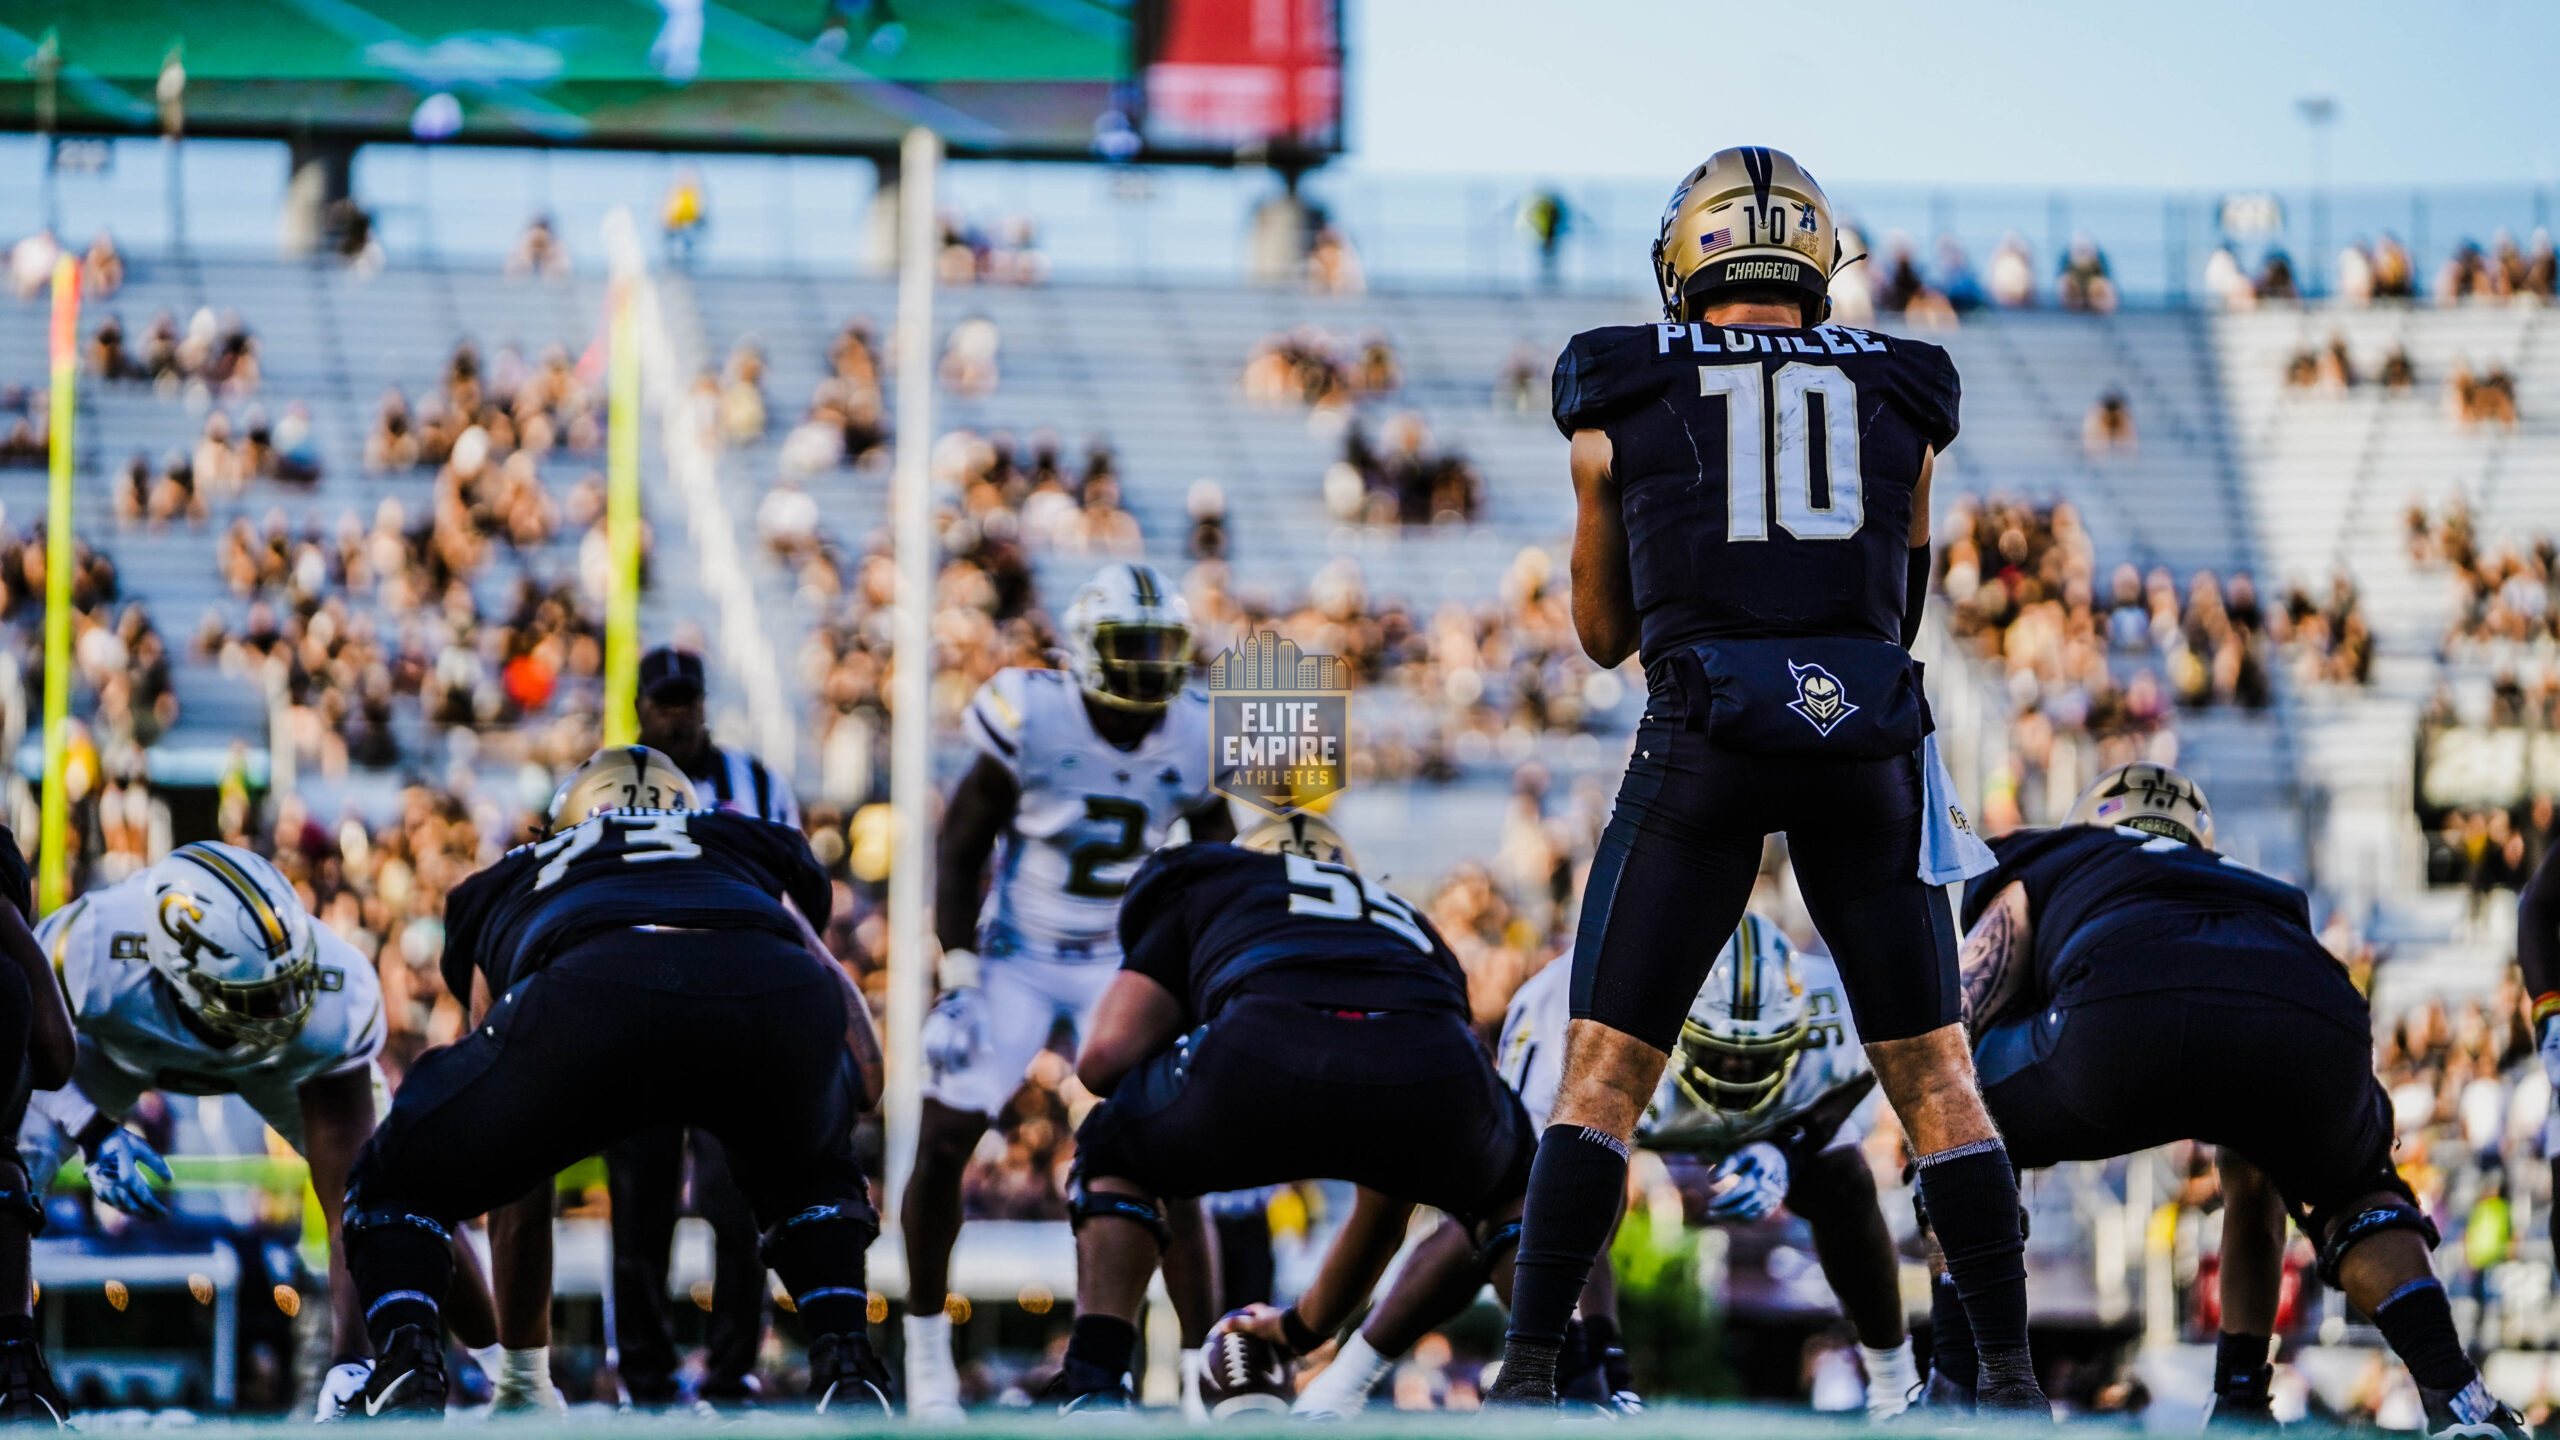 UCF hosts SMU to open conference play Elite Empire Athletes